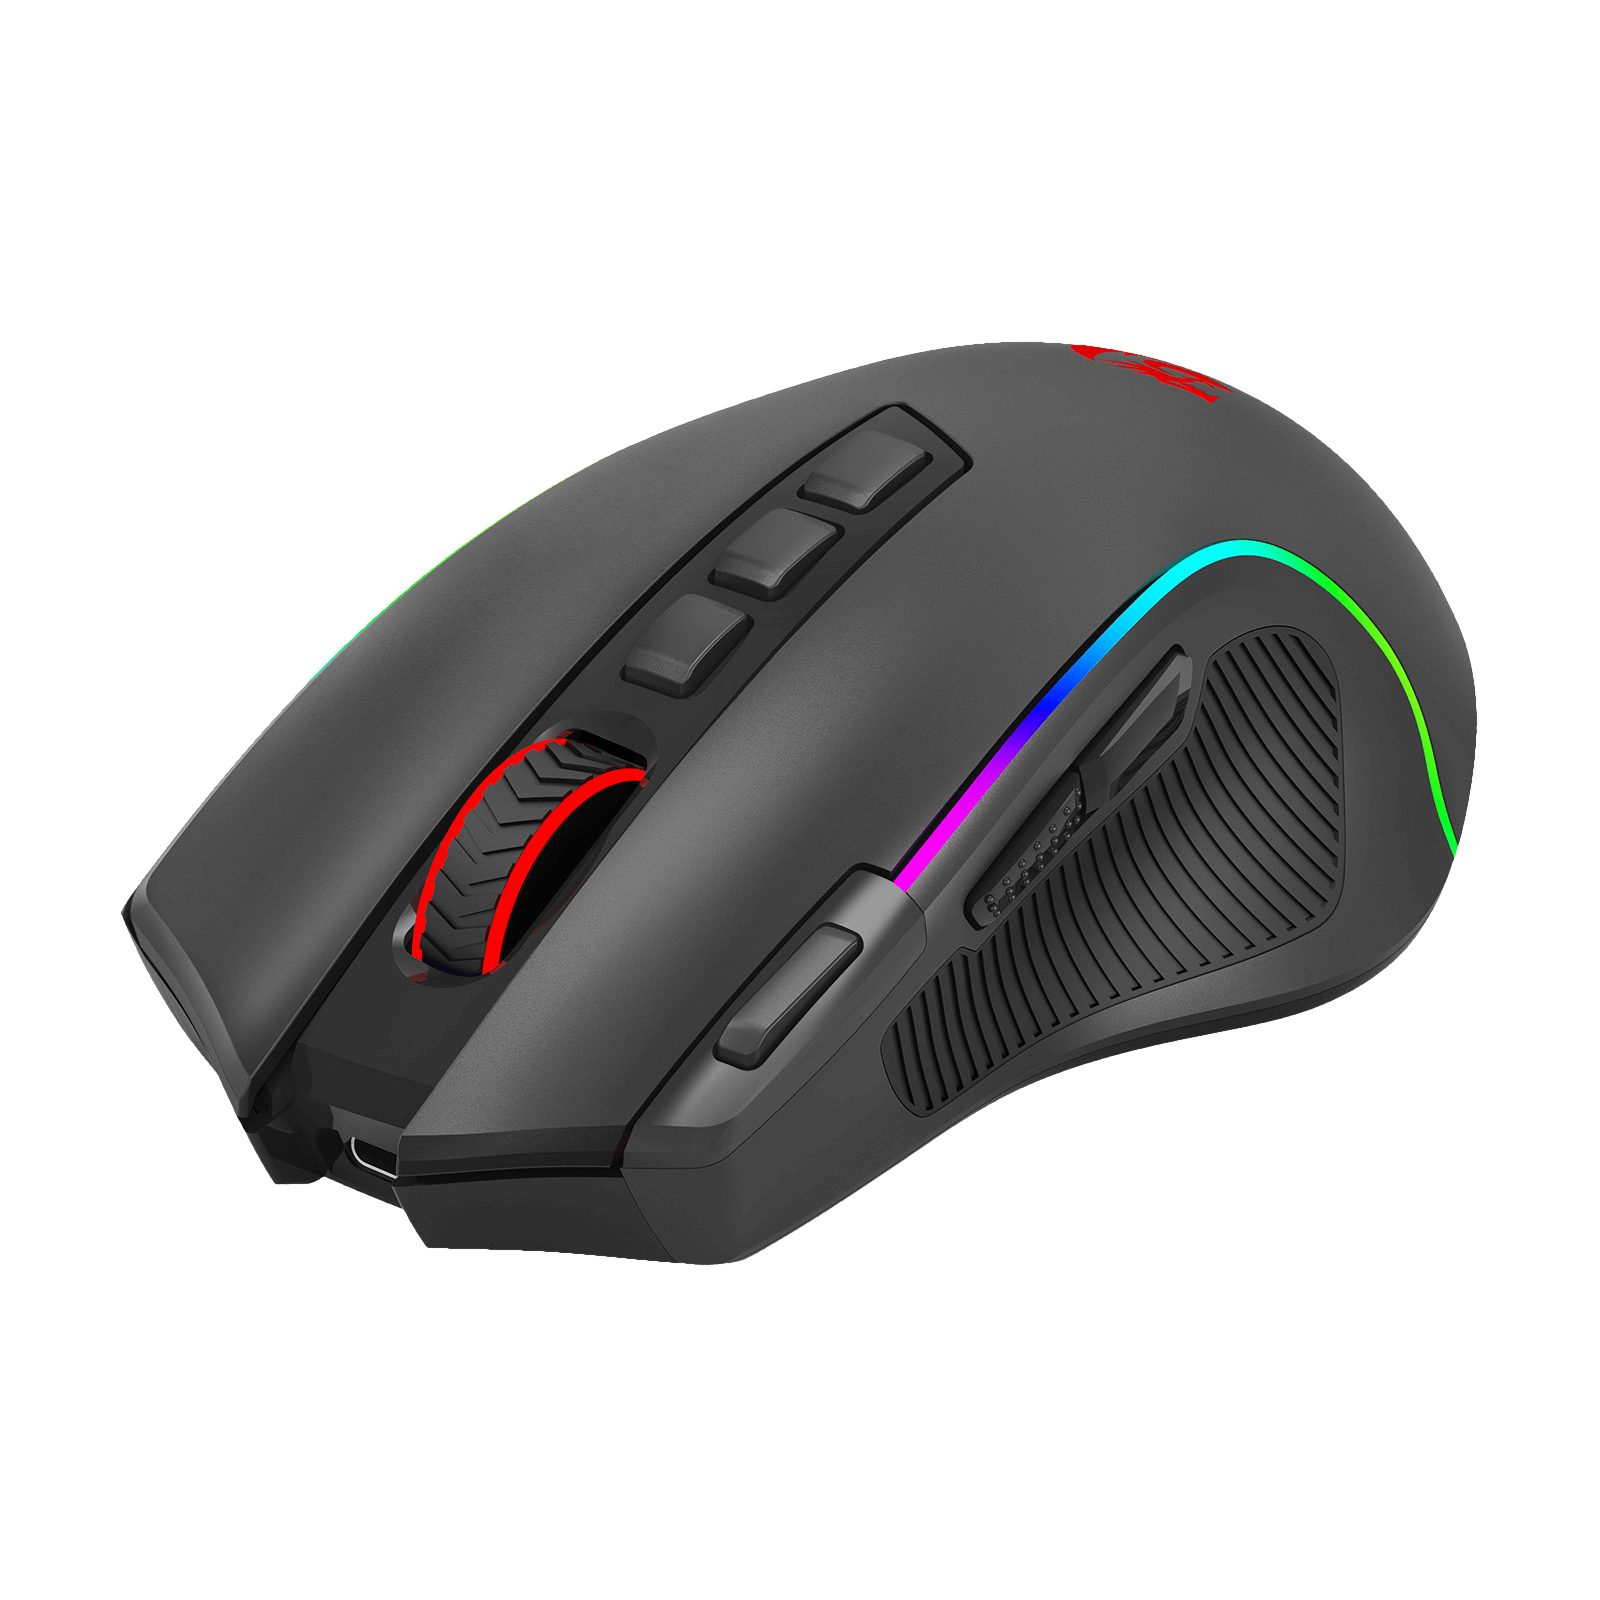 Redragon M612 PRO RGB Gaming Mouse, 8000 DPI Wired/Wireless Optical Gamer Mouse with 7 Programmable Buttons & 7 Backlit Modes, BT & 2.4G Wireless, Software Supports DIY Keybinds Rapid Fire Button